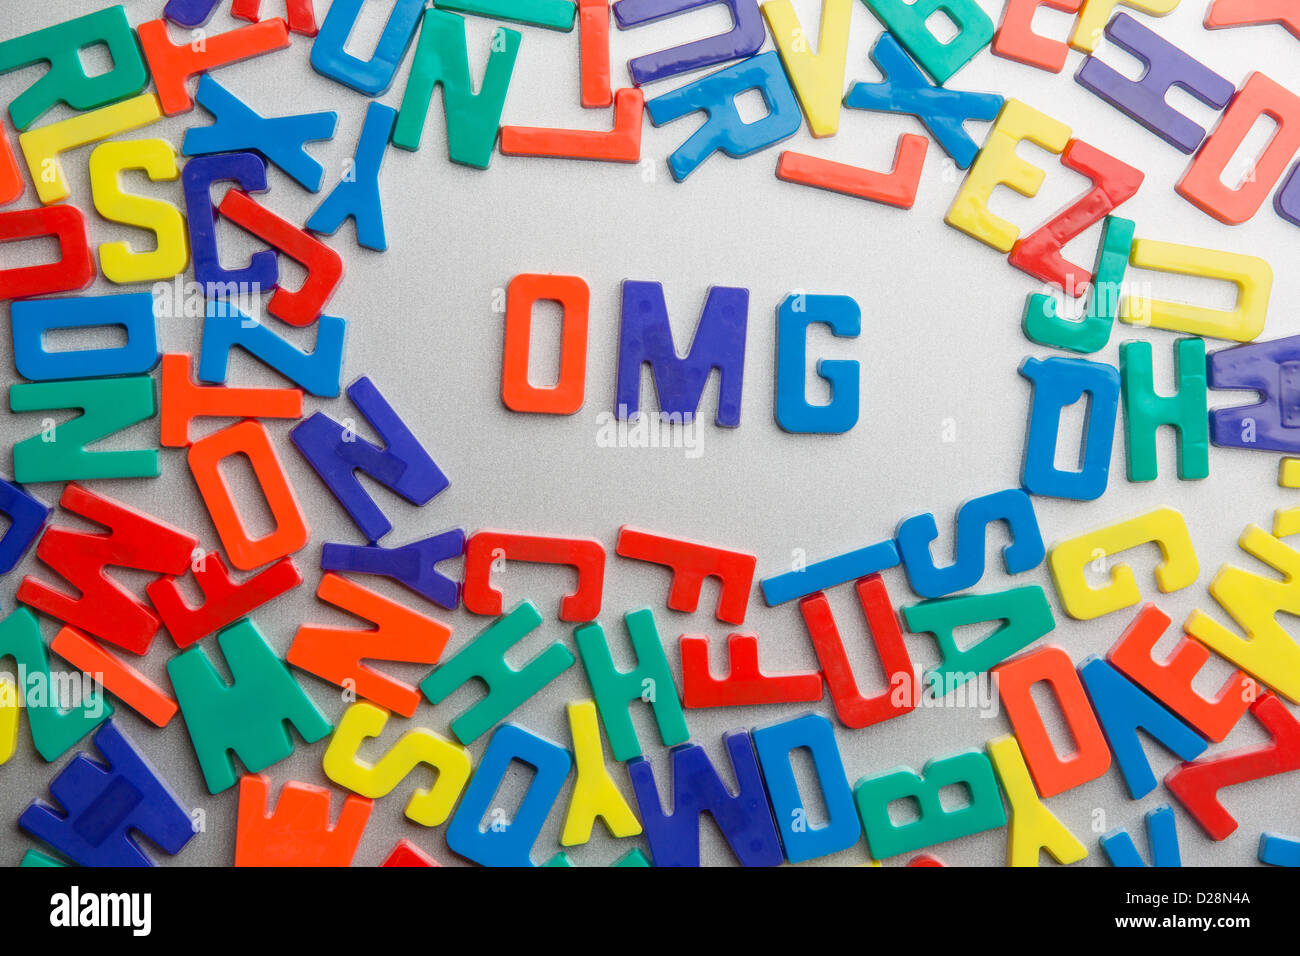 'OMG' - Refrigerator magnets spell messages out of a jumble of letters Stock Photo